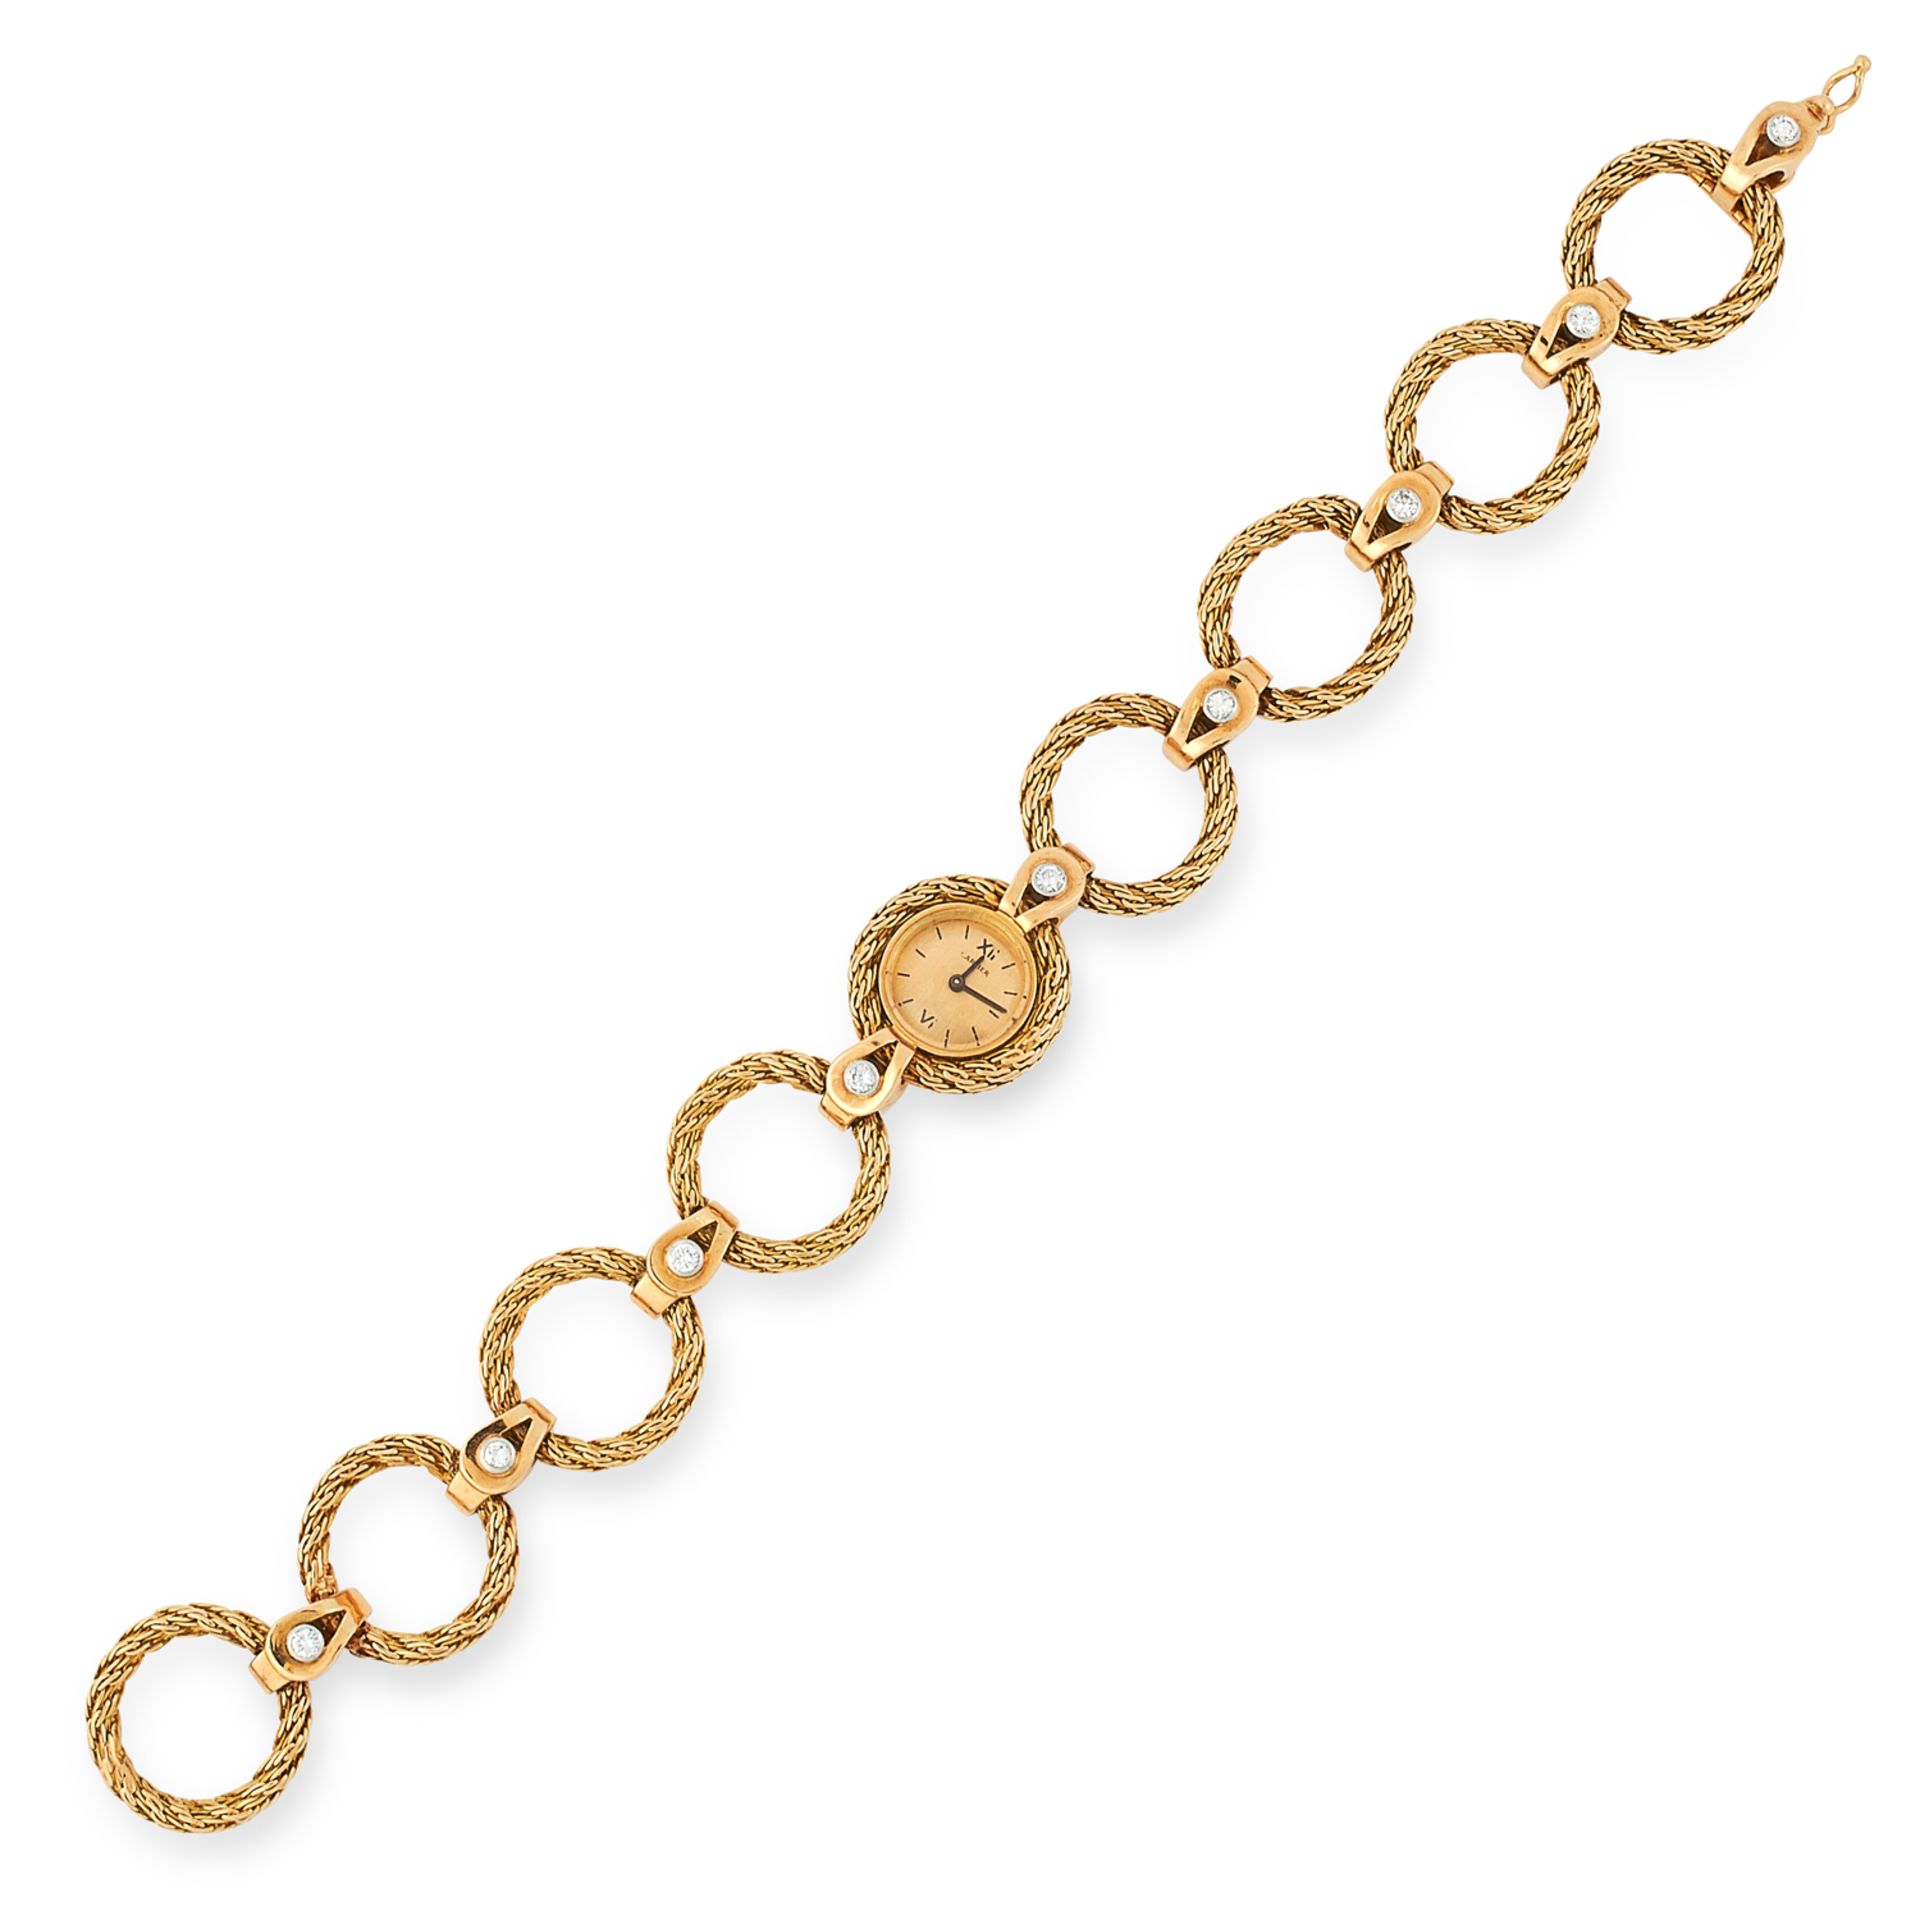 A VINTAGE LADIES DIAMOND WRISTWATCH, CARTIER comprising of textured gold hoop links set with round